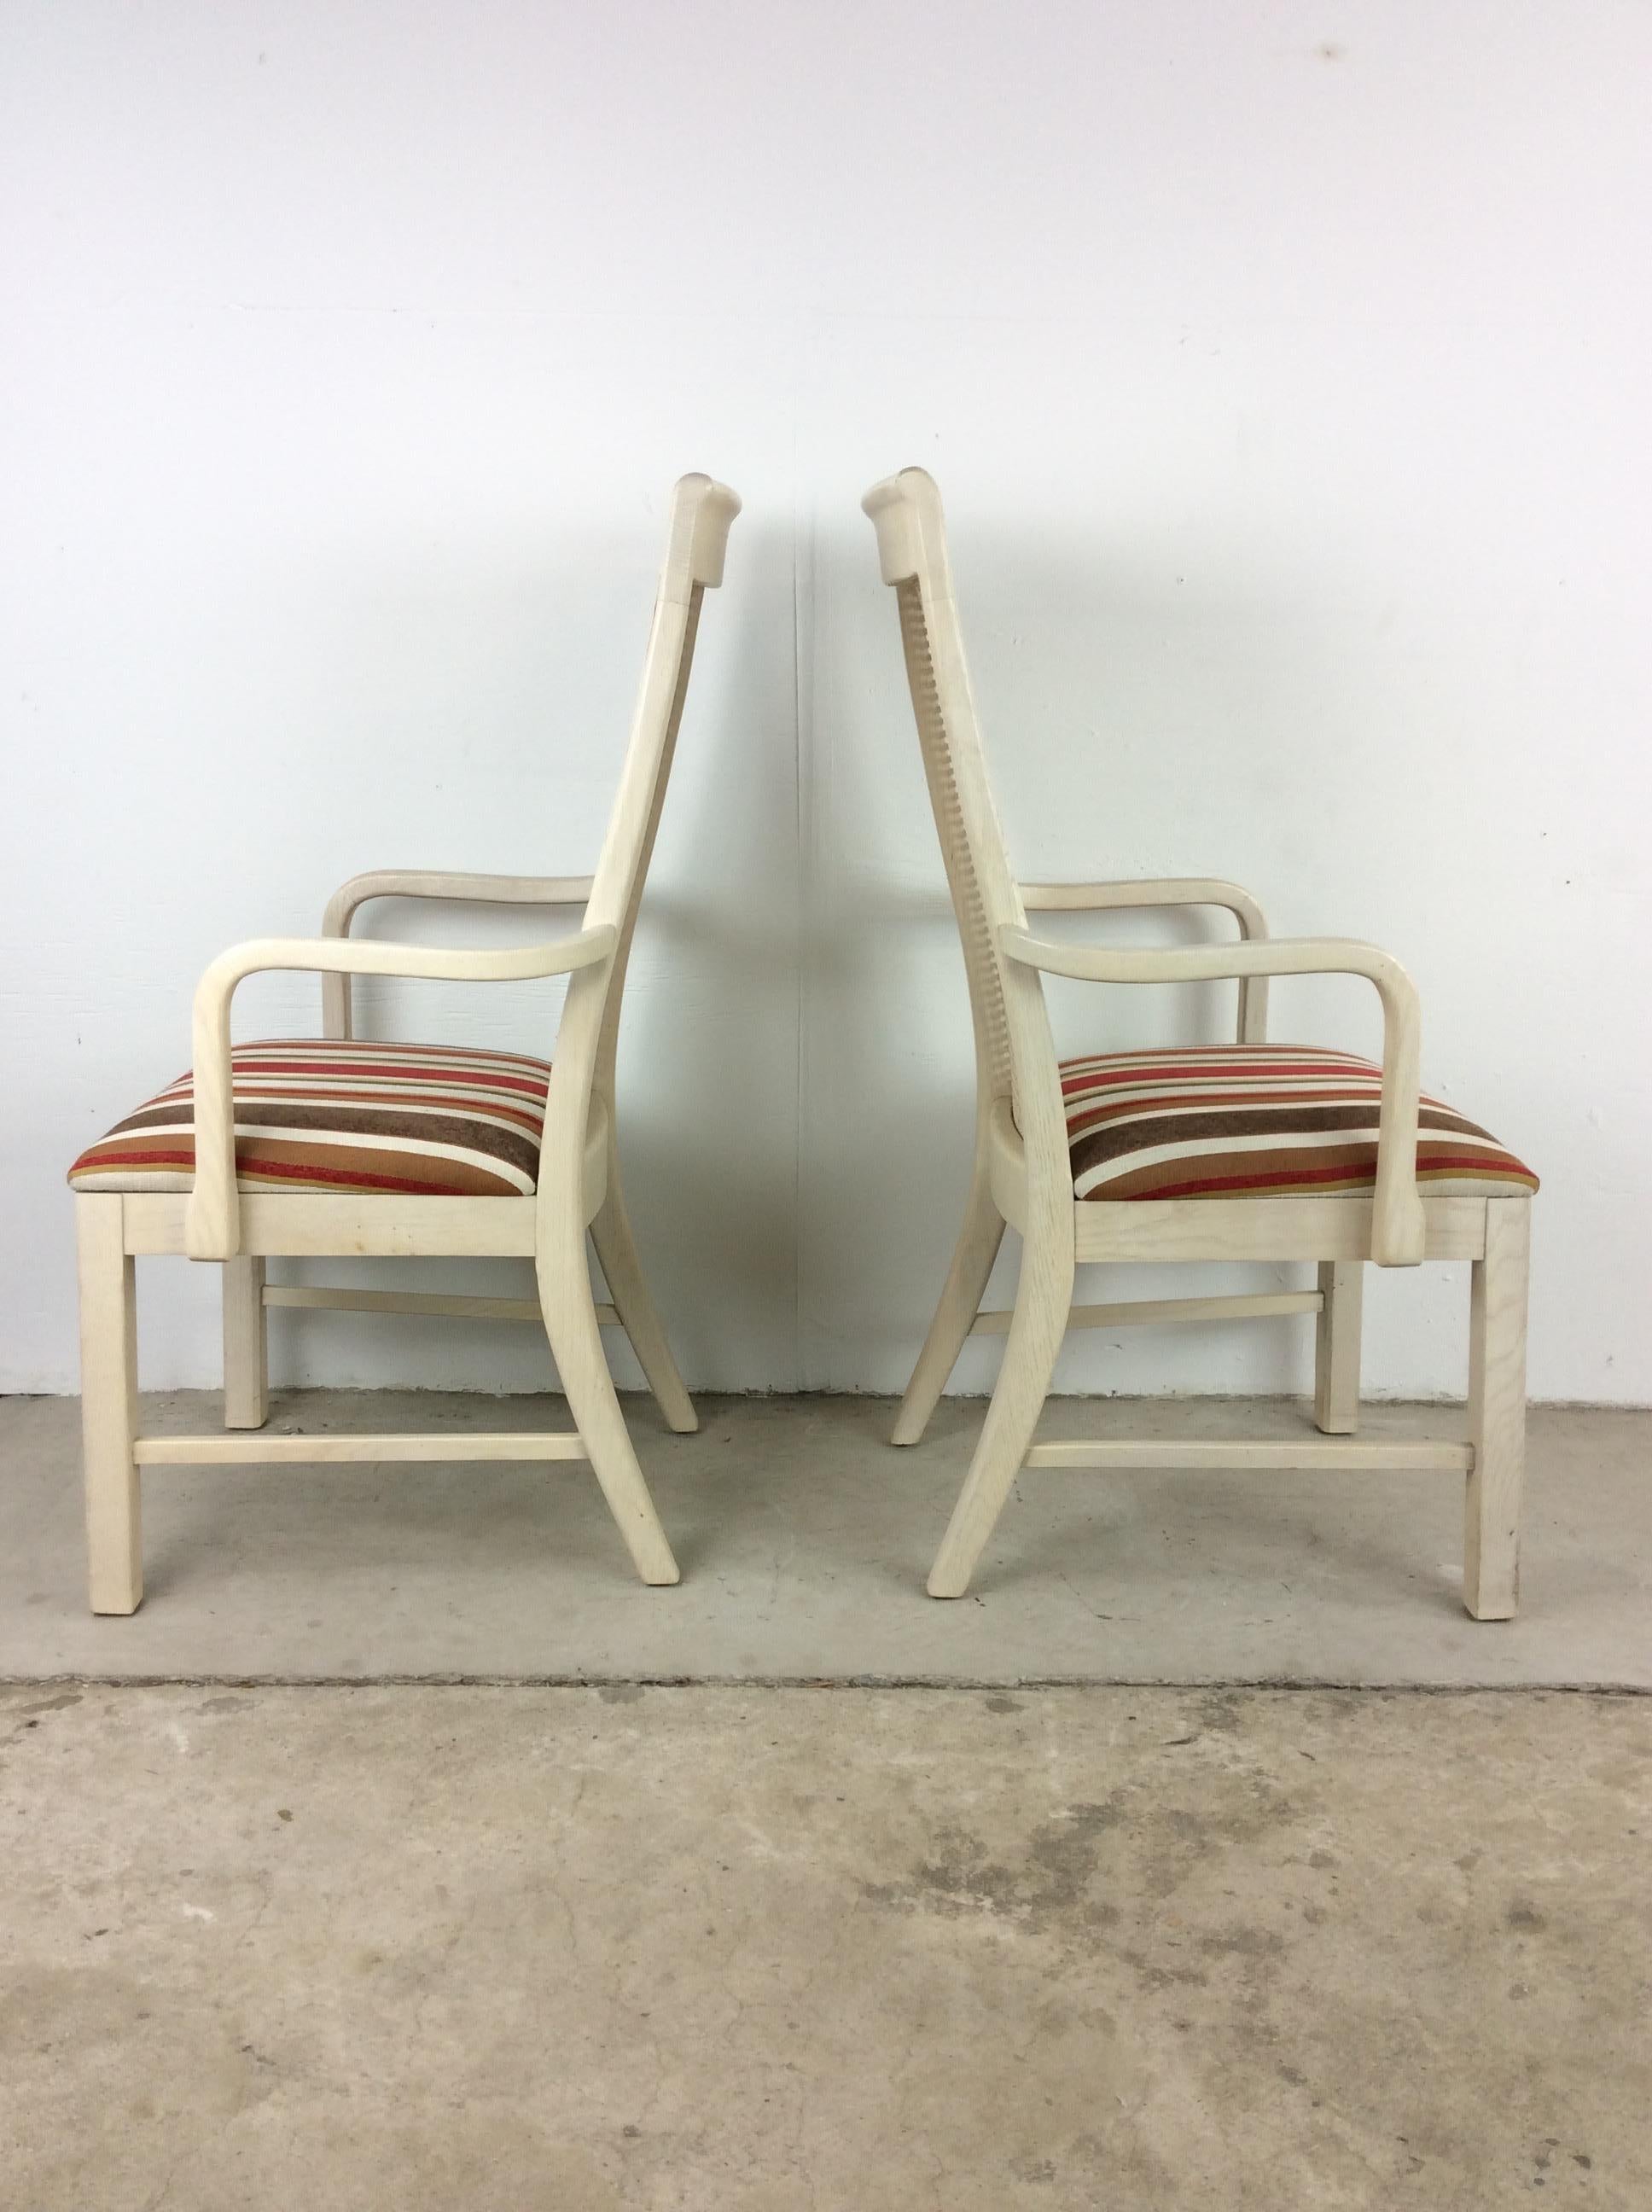 This pair of dining chairs features hardwood construction, original white wash finish, cane backed seats, vintage red brown white striped upholstery, sculpted wood arm rests and tall tapered legs.  

Complimentary lounge chair available